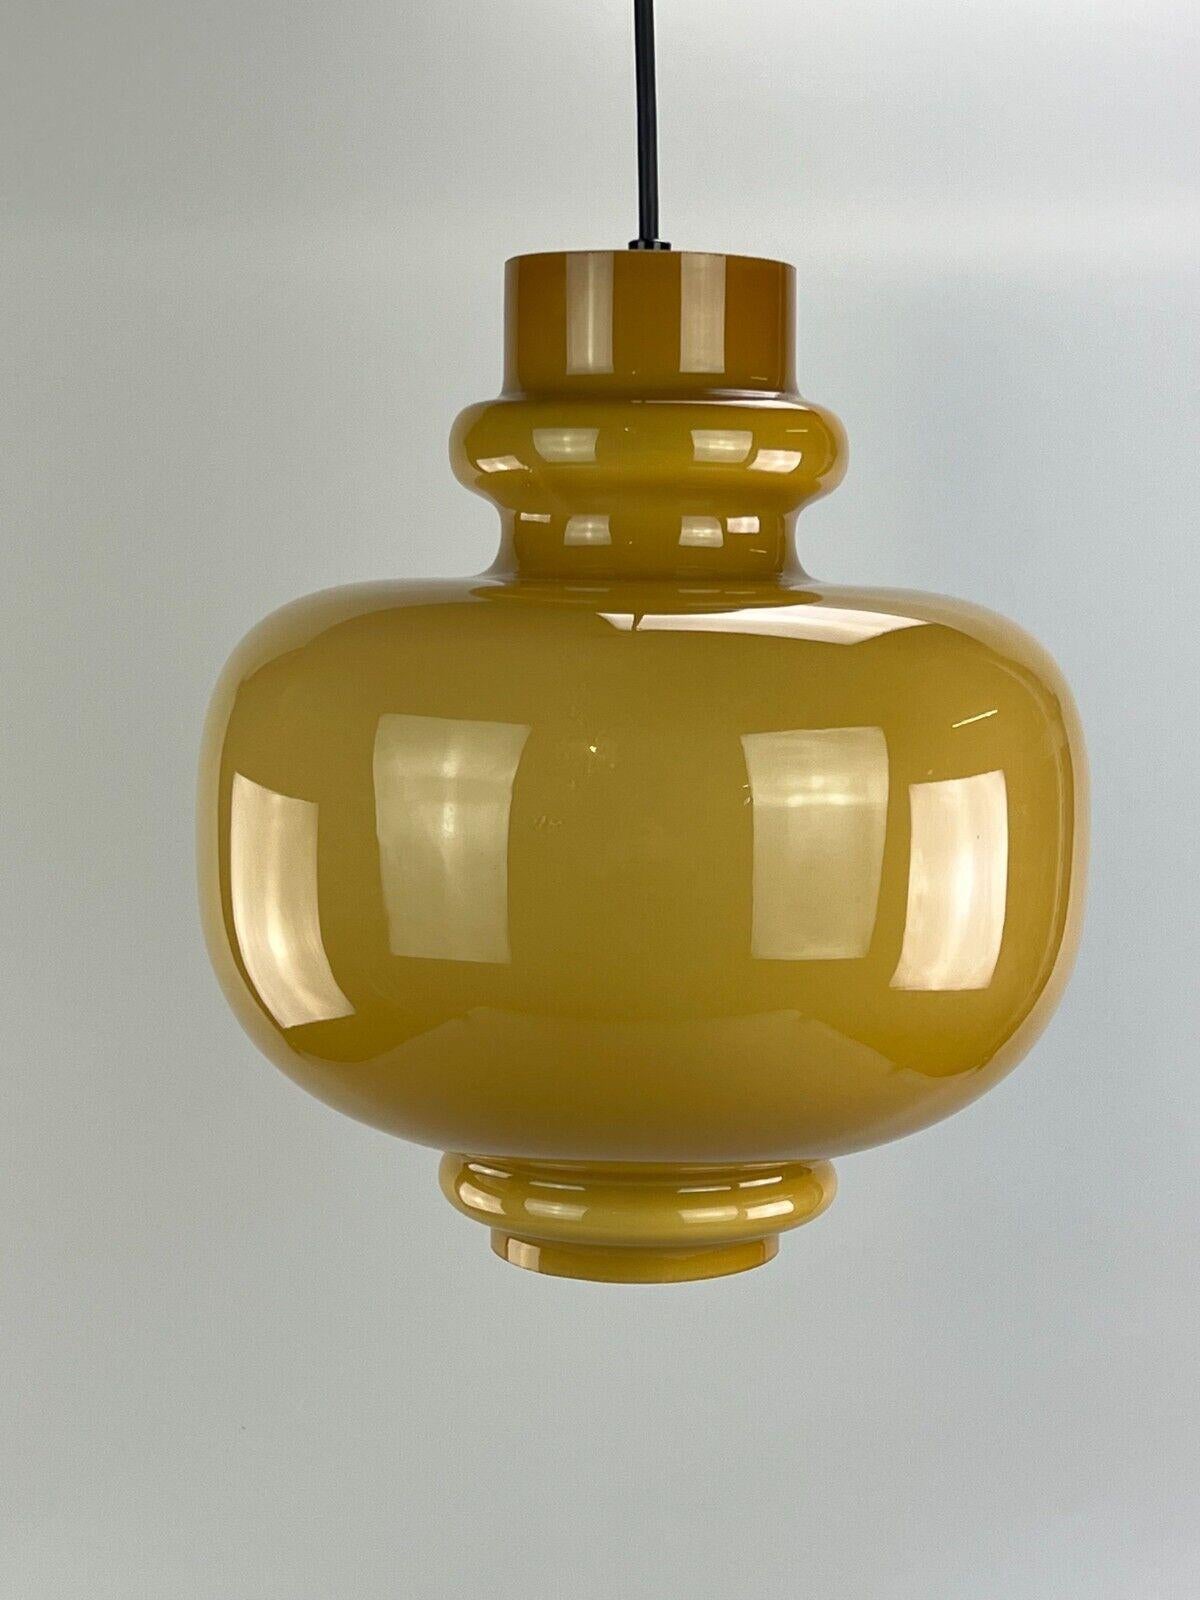 60s 70s Lamp Light Hanging Lamp Hans Agne Jakobsson for Staff Mustard Yellow For Sale 3